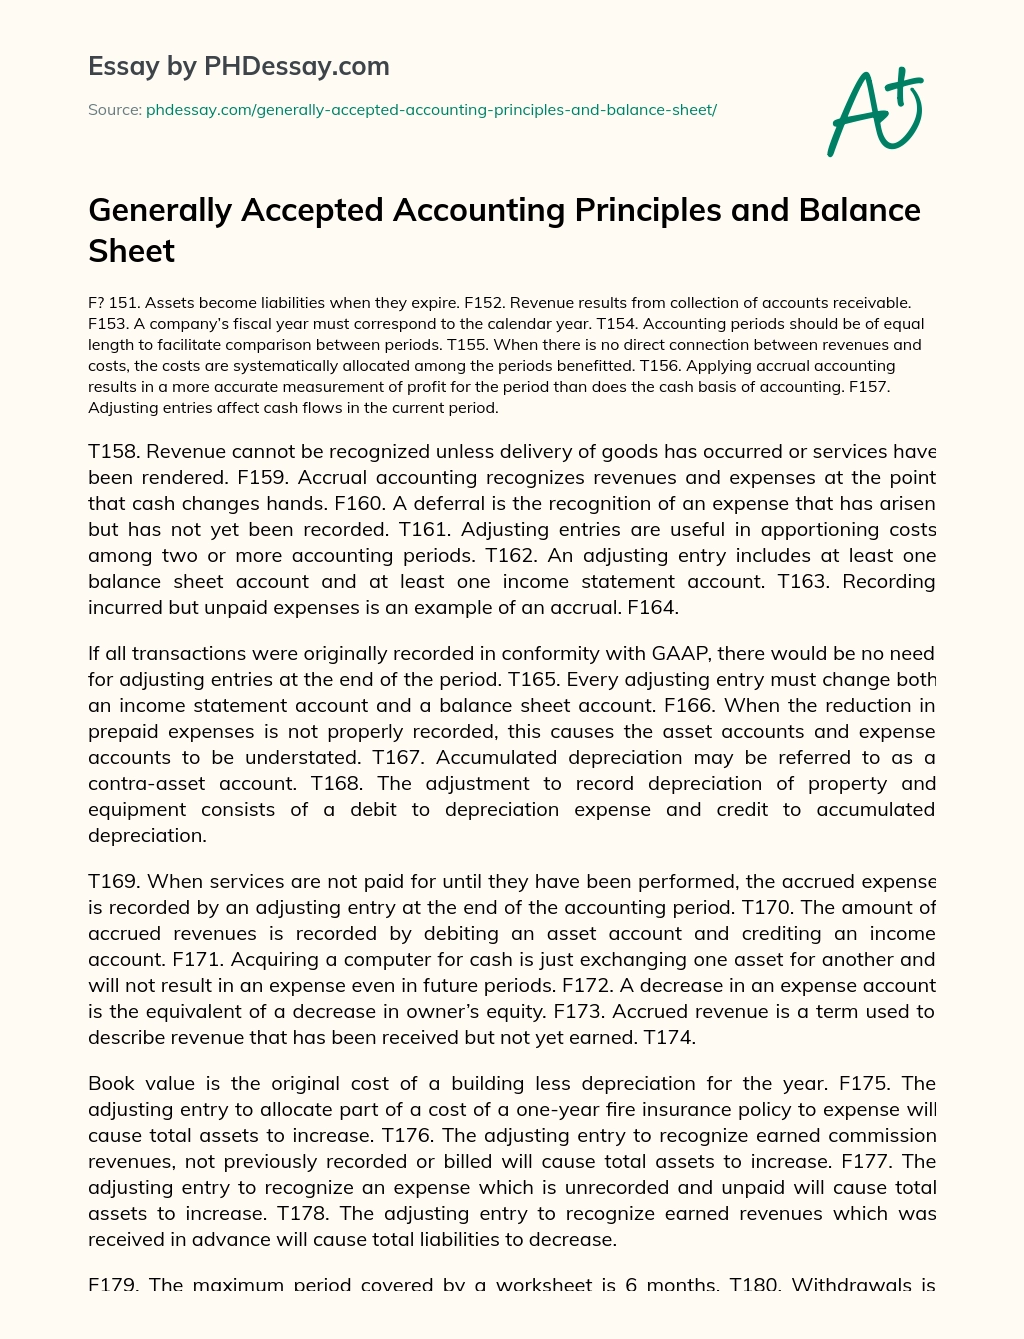 Generally Accepted Accounting Principles and Balance Sheet essay